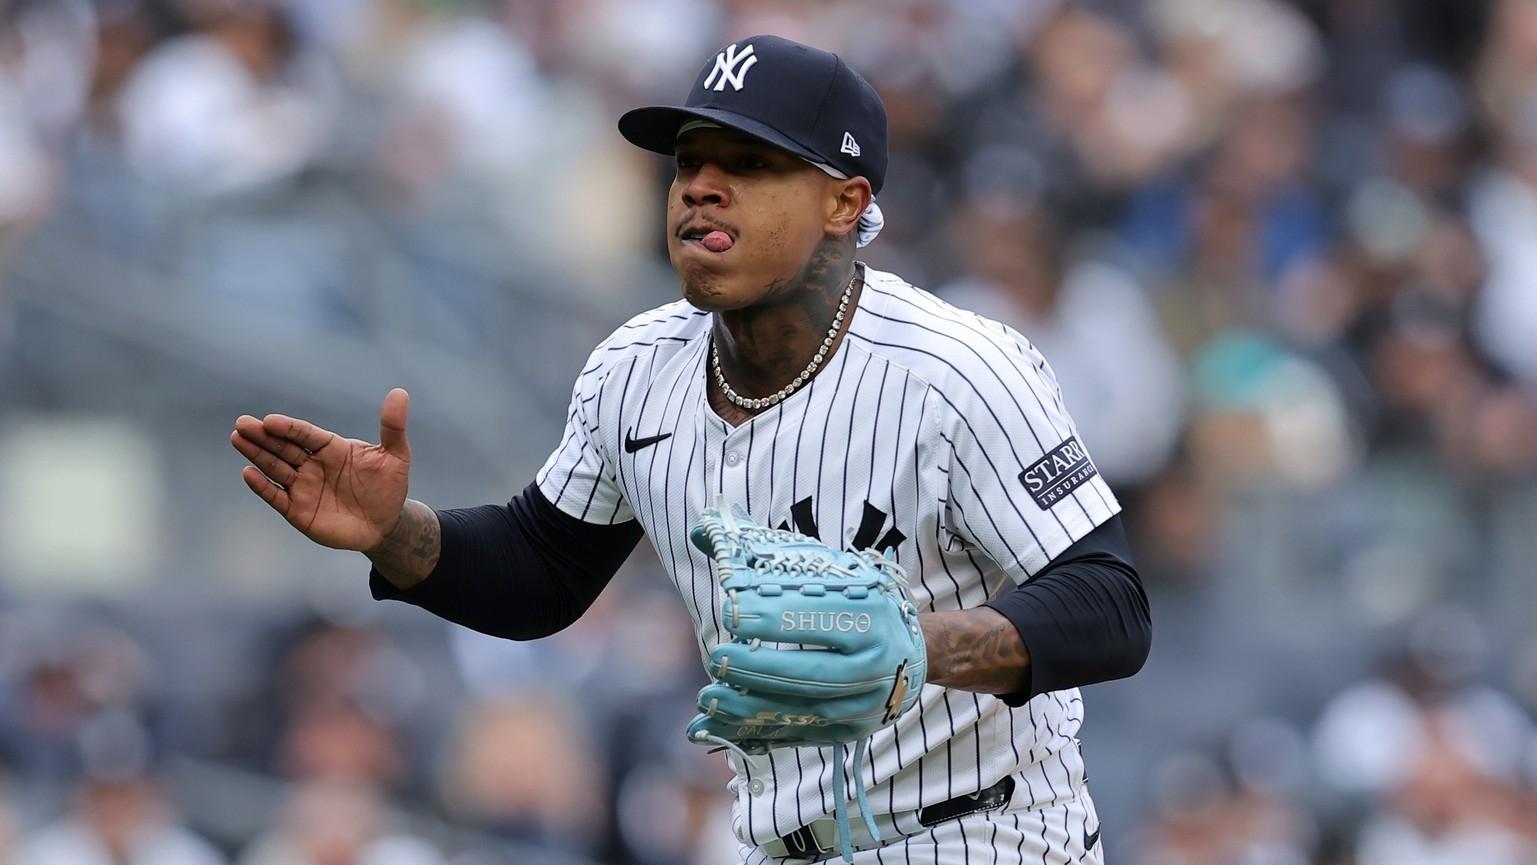 New York Yankees starting pitcher Marcus Stroman (0) claps after striking out Toronto Blue Jays first baseman Vladimir Guerrero Jr. (not pictured) during the fifth inning at Yankee Stadium. / Brad Penner-USA TODAY Sports